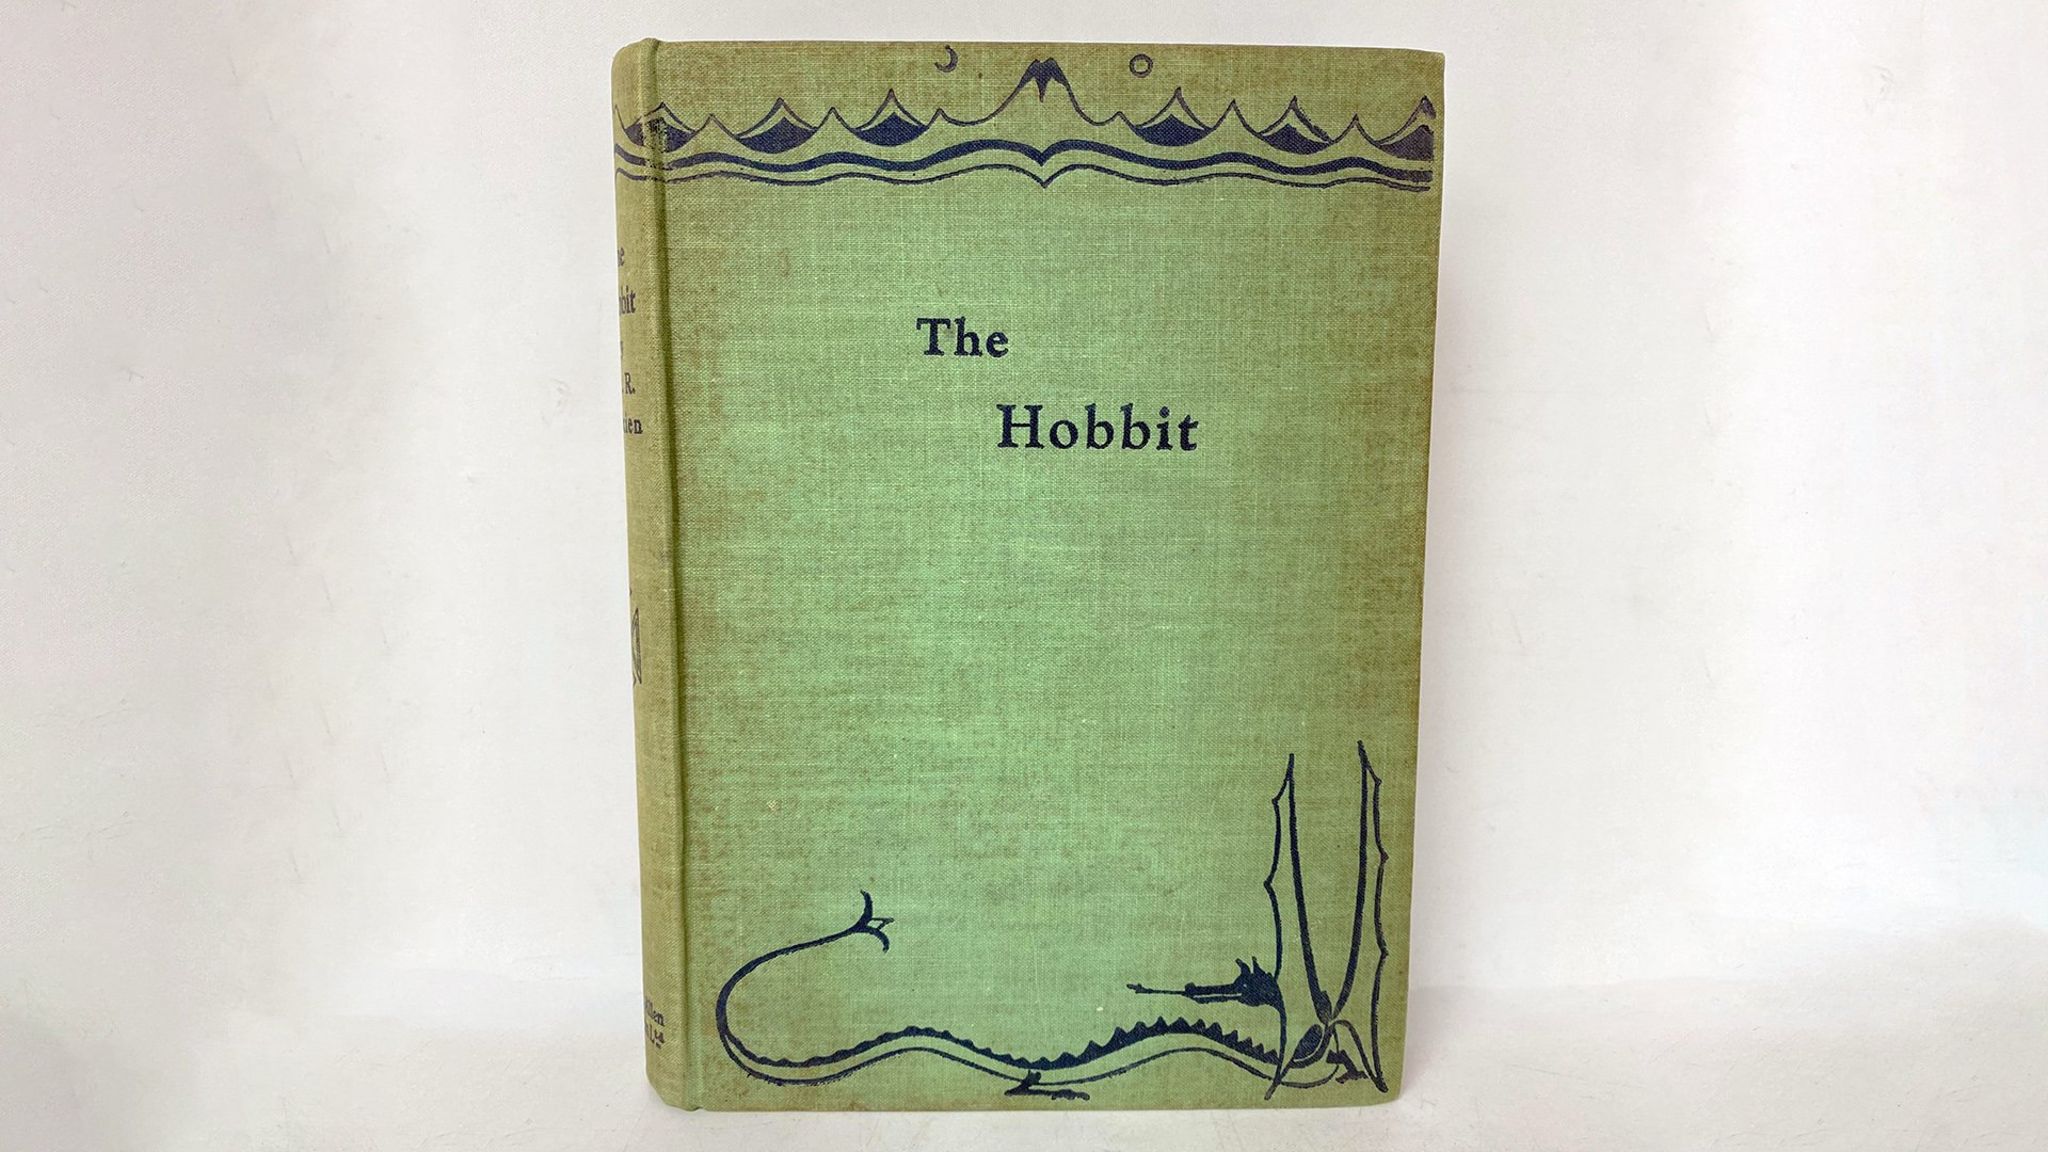 The Hobbit first edition found in charity shop sells for £10,000